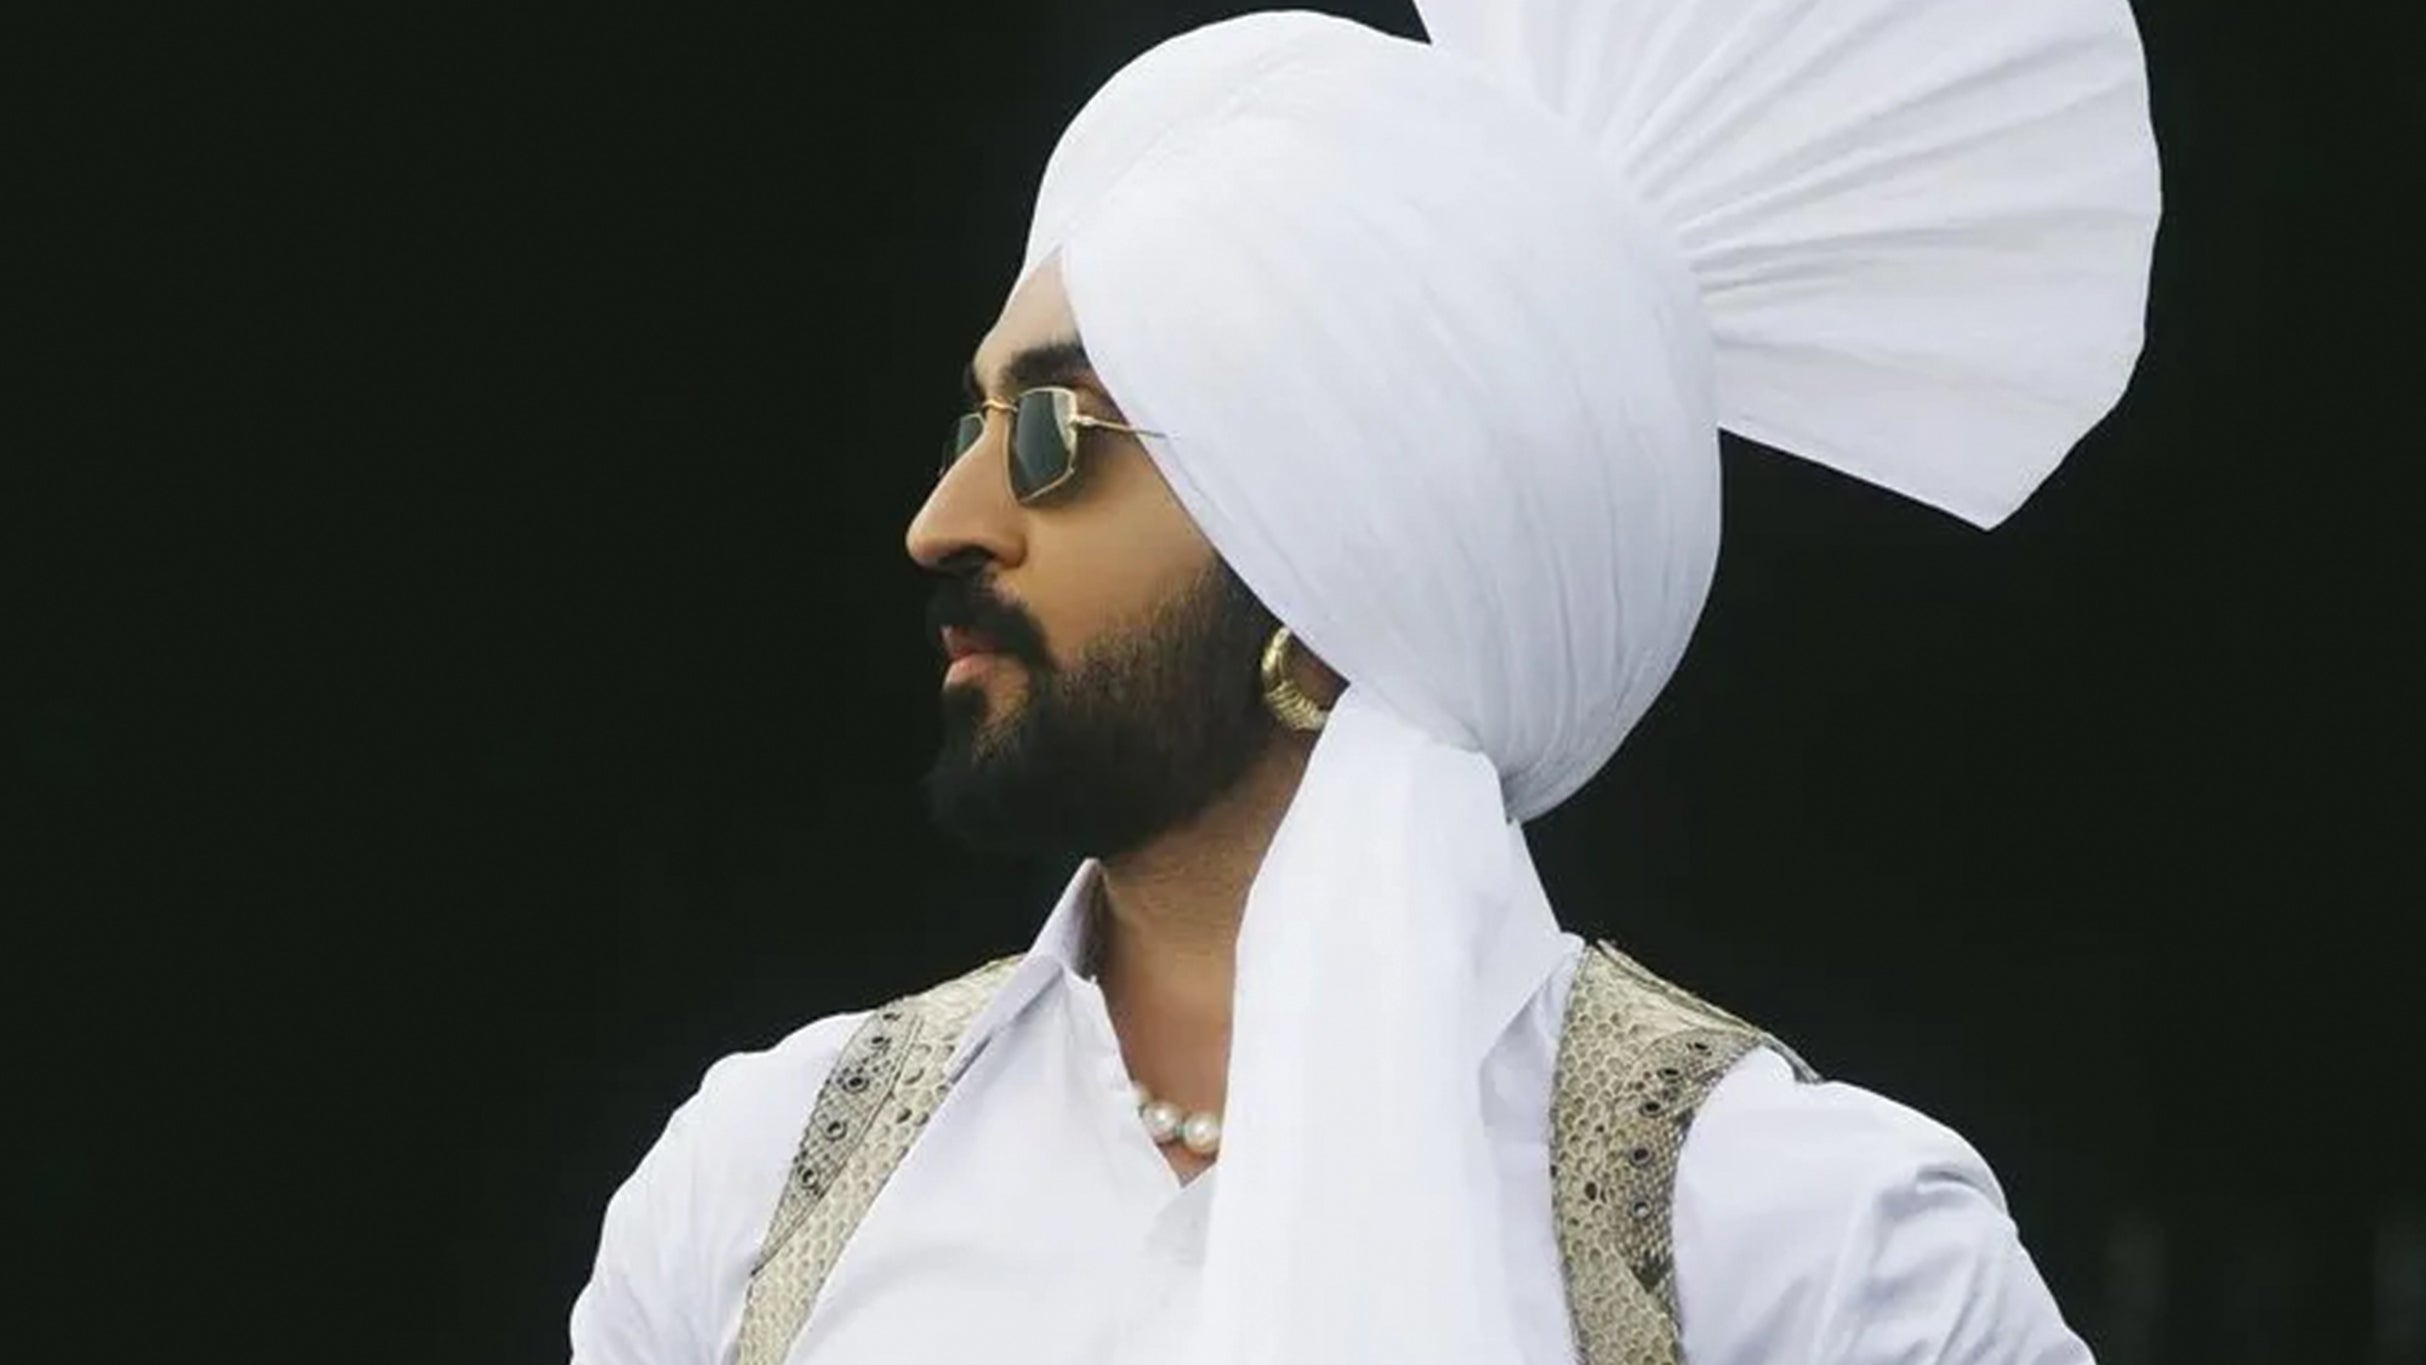 Diljit Dosanjh - Diluminati Tour  free presale listing for show tickets in Vancouver, BC (BC Place)